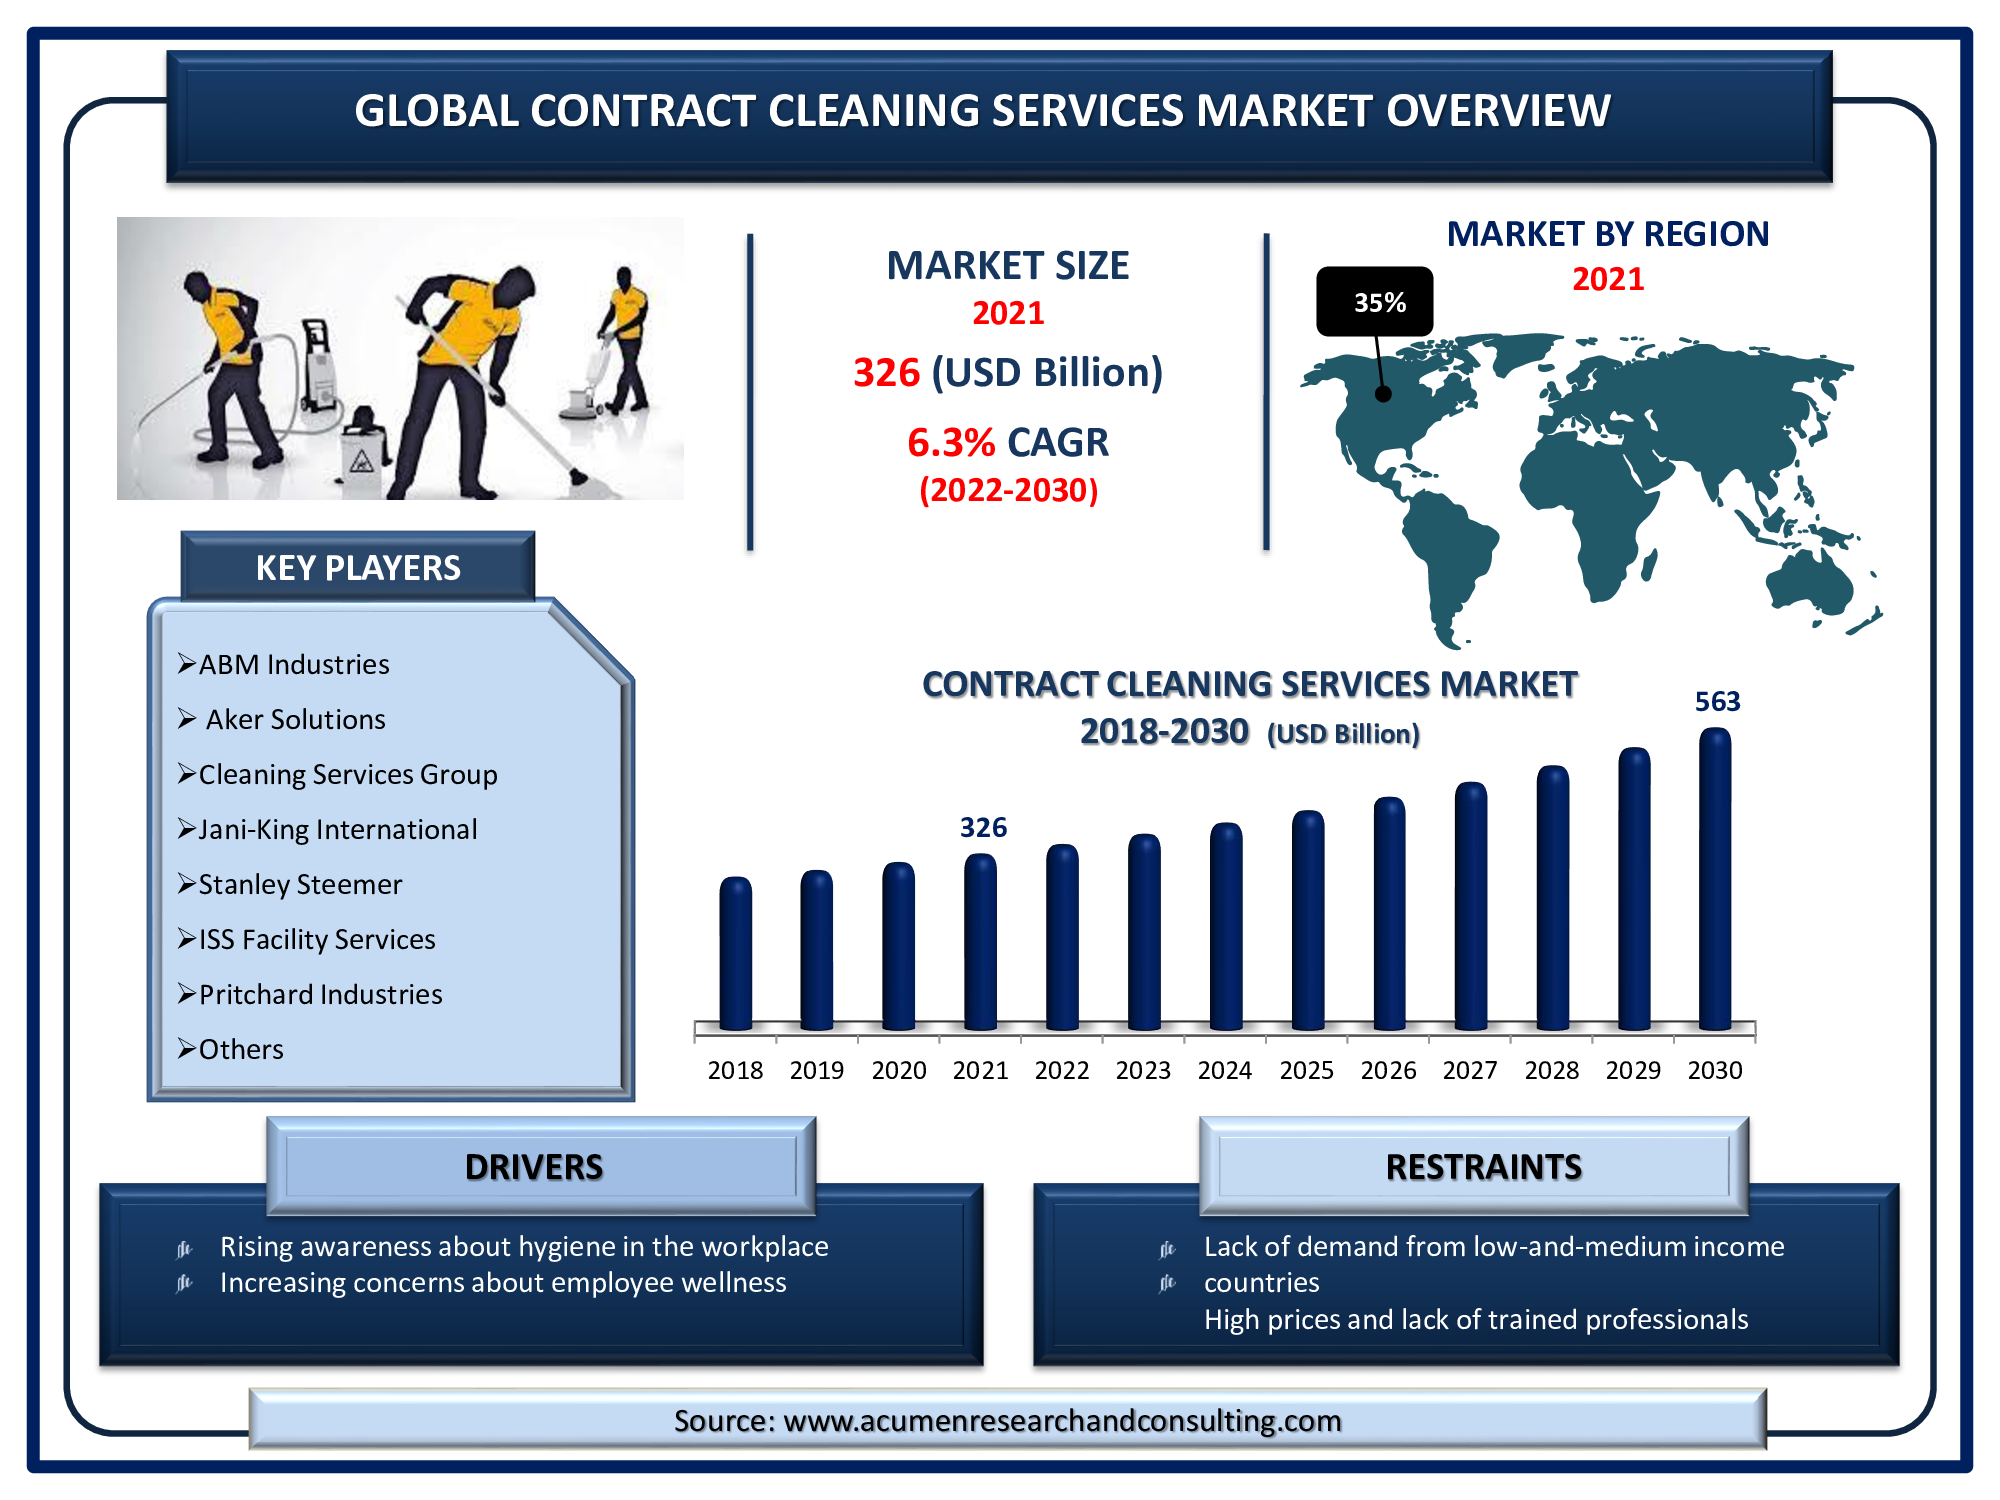 Contract Cleaning Services Market is estimated to reach USD 563 Billion by 2030, with a CAGR of 6.3%